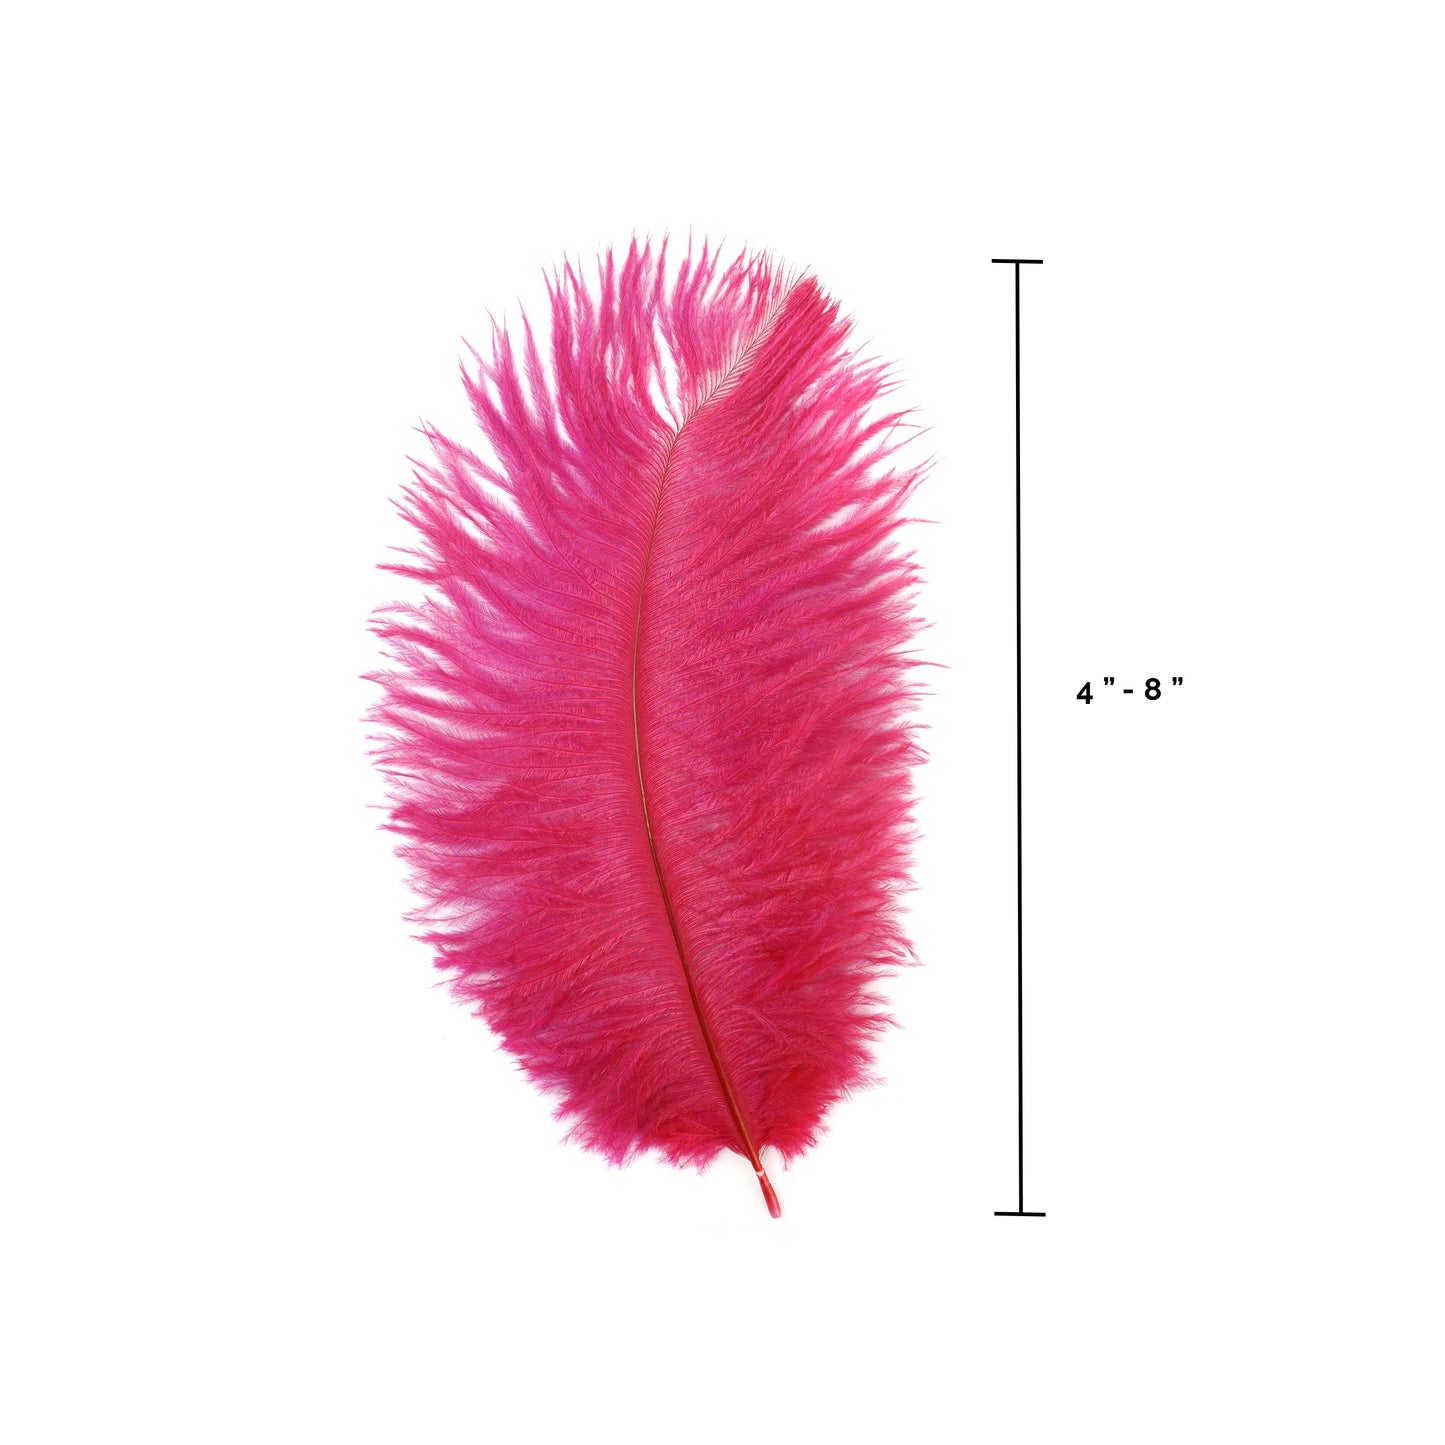 Ostrich Feathers 4-8" Drabs - Shocking Pink